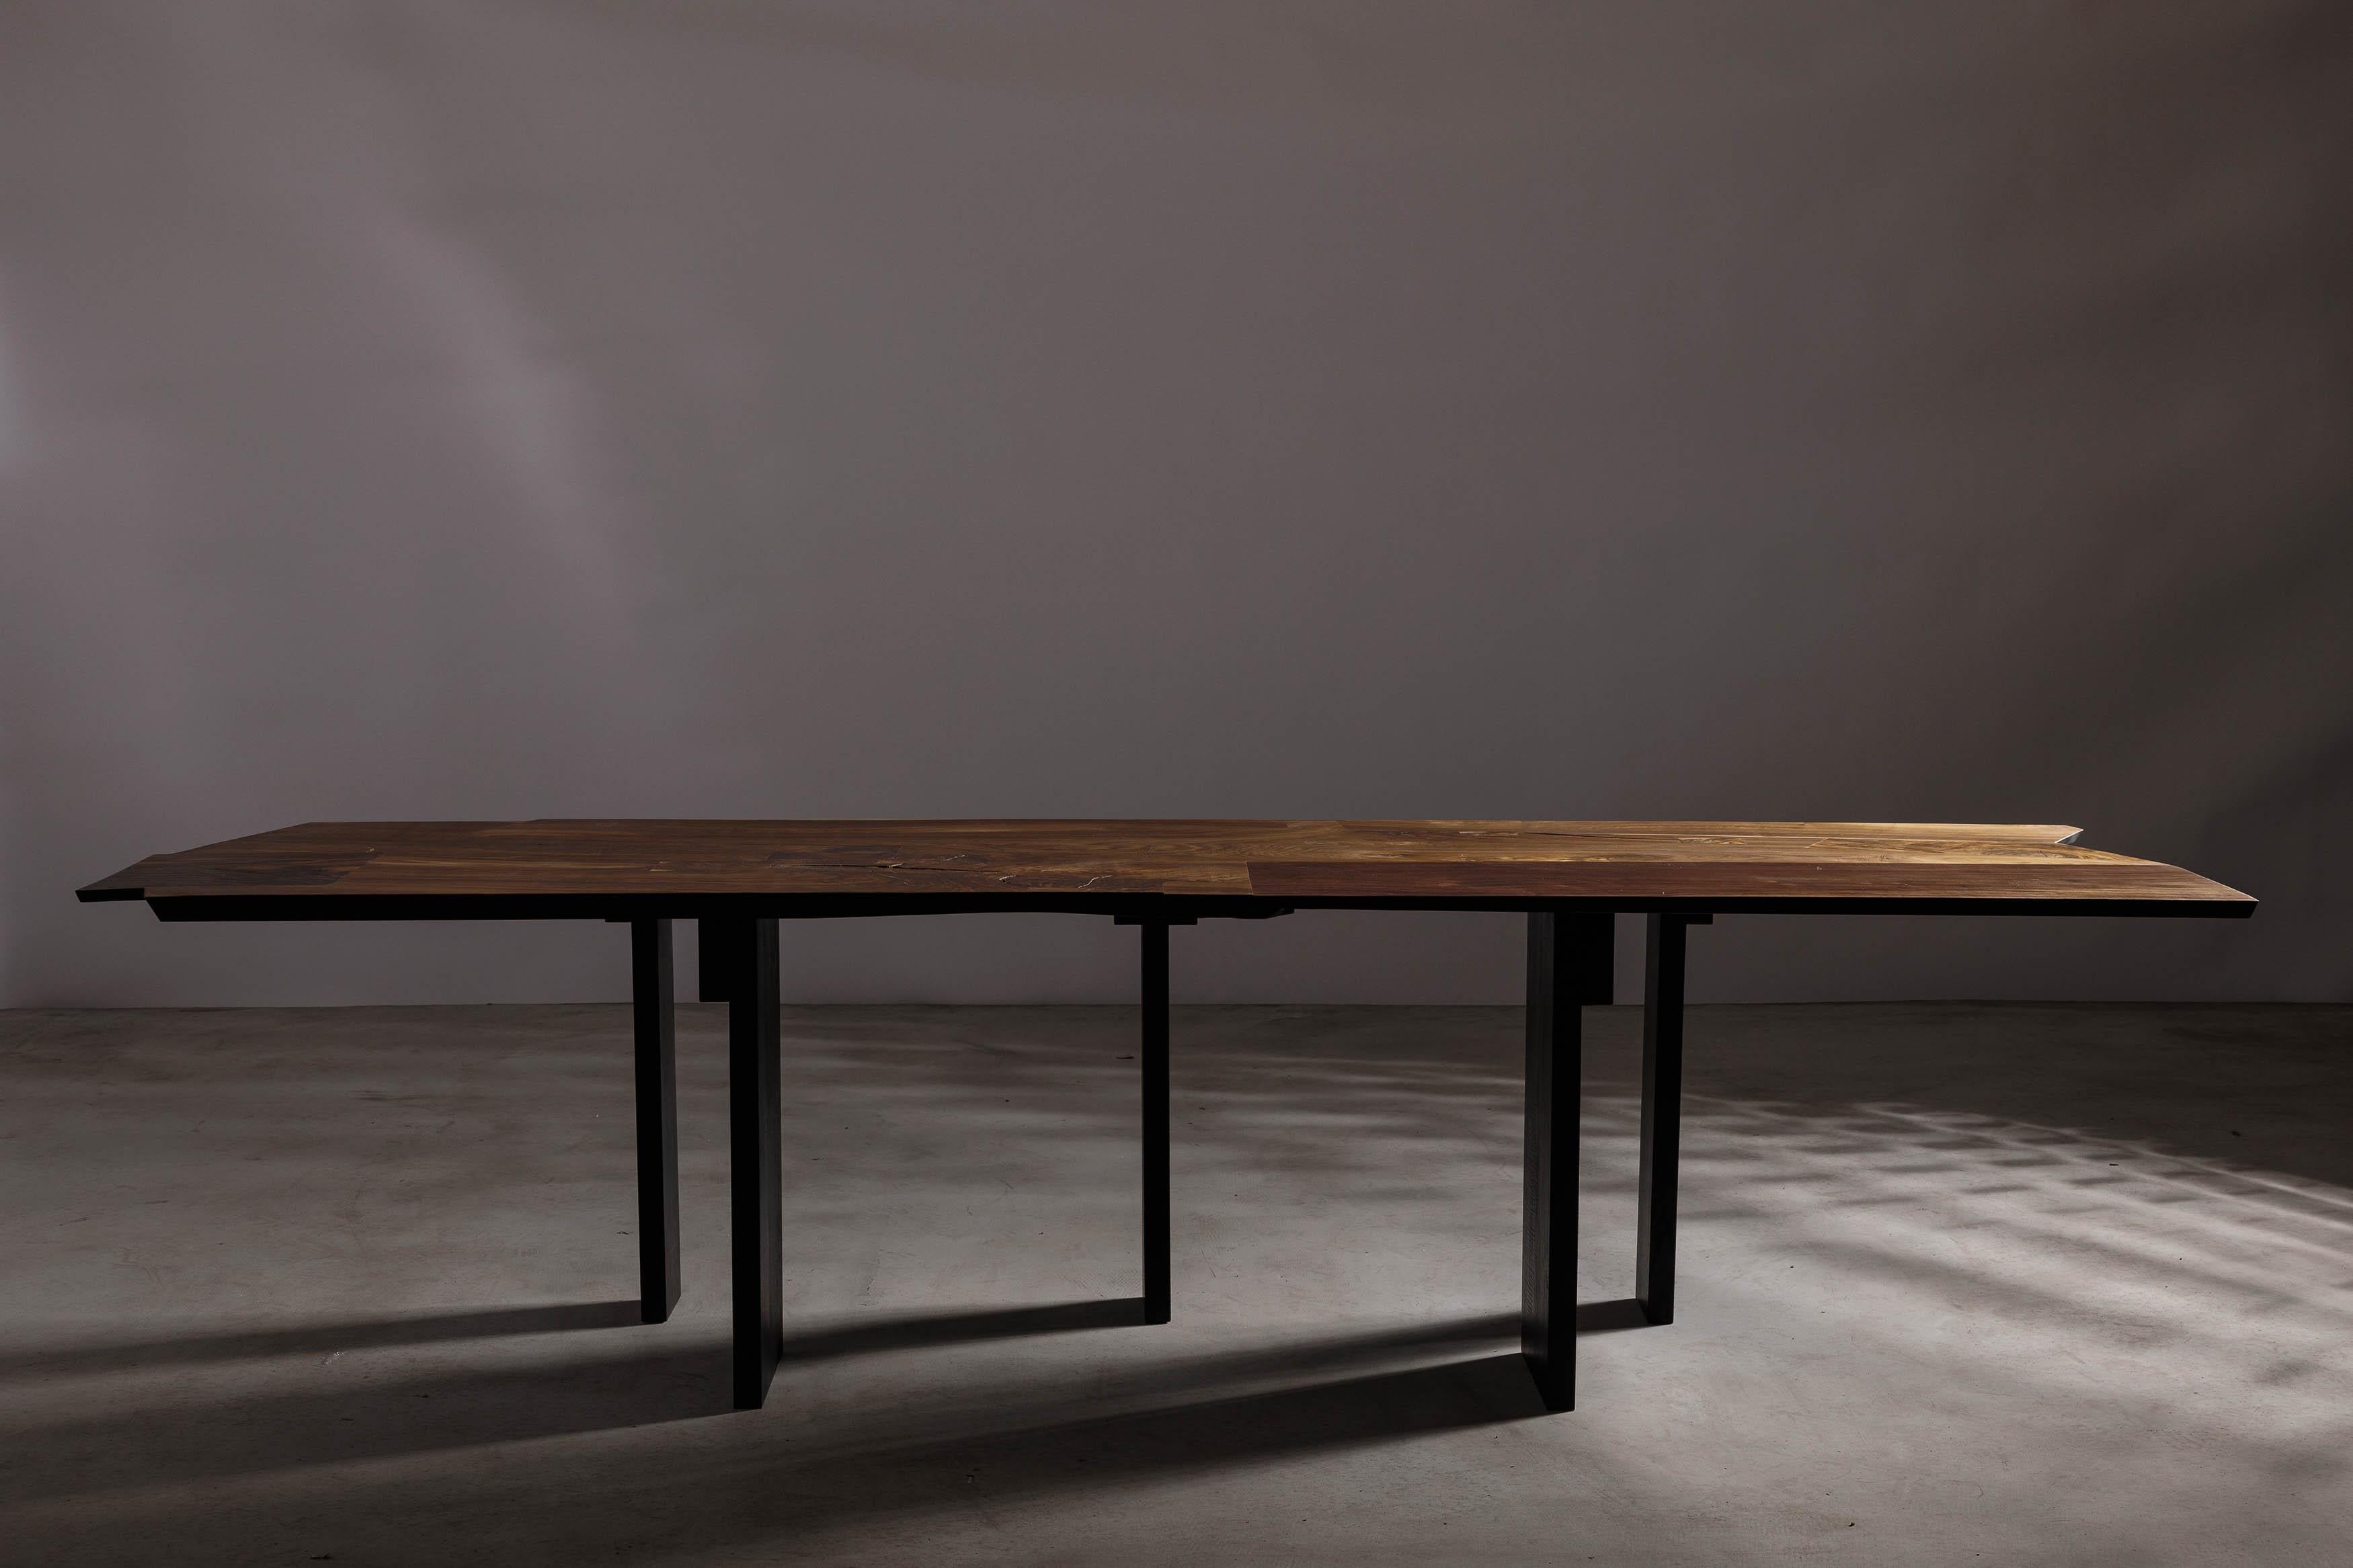 Introducing our stunning dining table, a seamless blend of brutalism and minimalism, featuring an organic texture that is both rugged and refined. This masterpiece is part of our latest collection, a tribute to the architectural movement that